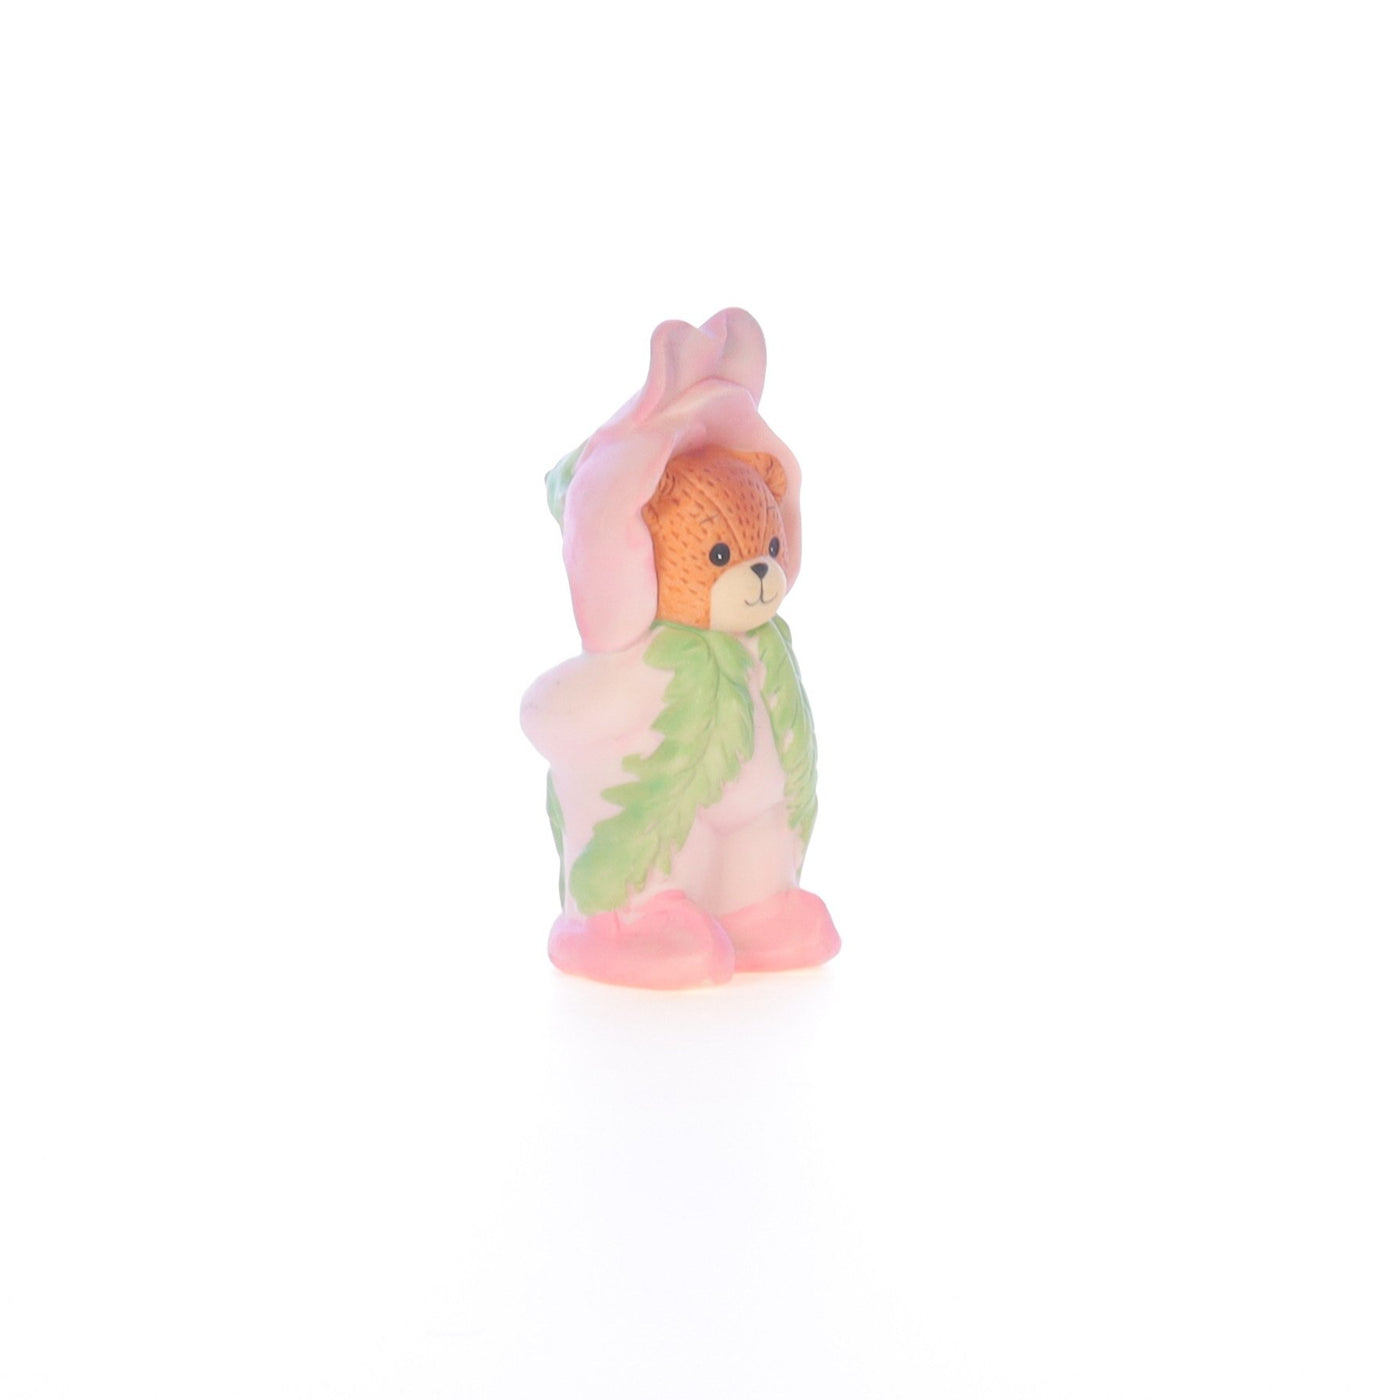 Lucy_And_Me_by_Lucy_Atwell_Porcelain_Figurine_Bear_with_Pink_Flower_Costume_Lucy_Unknown_011_08